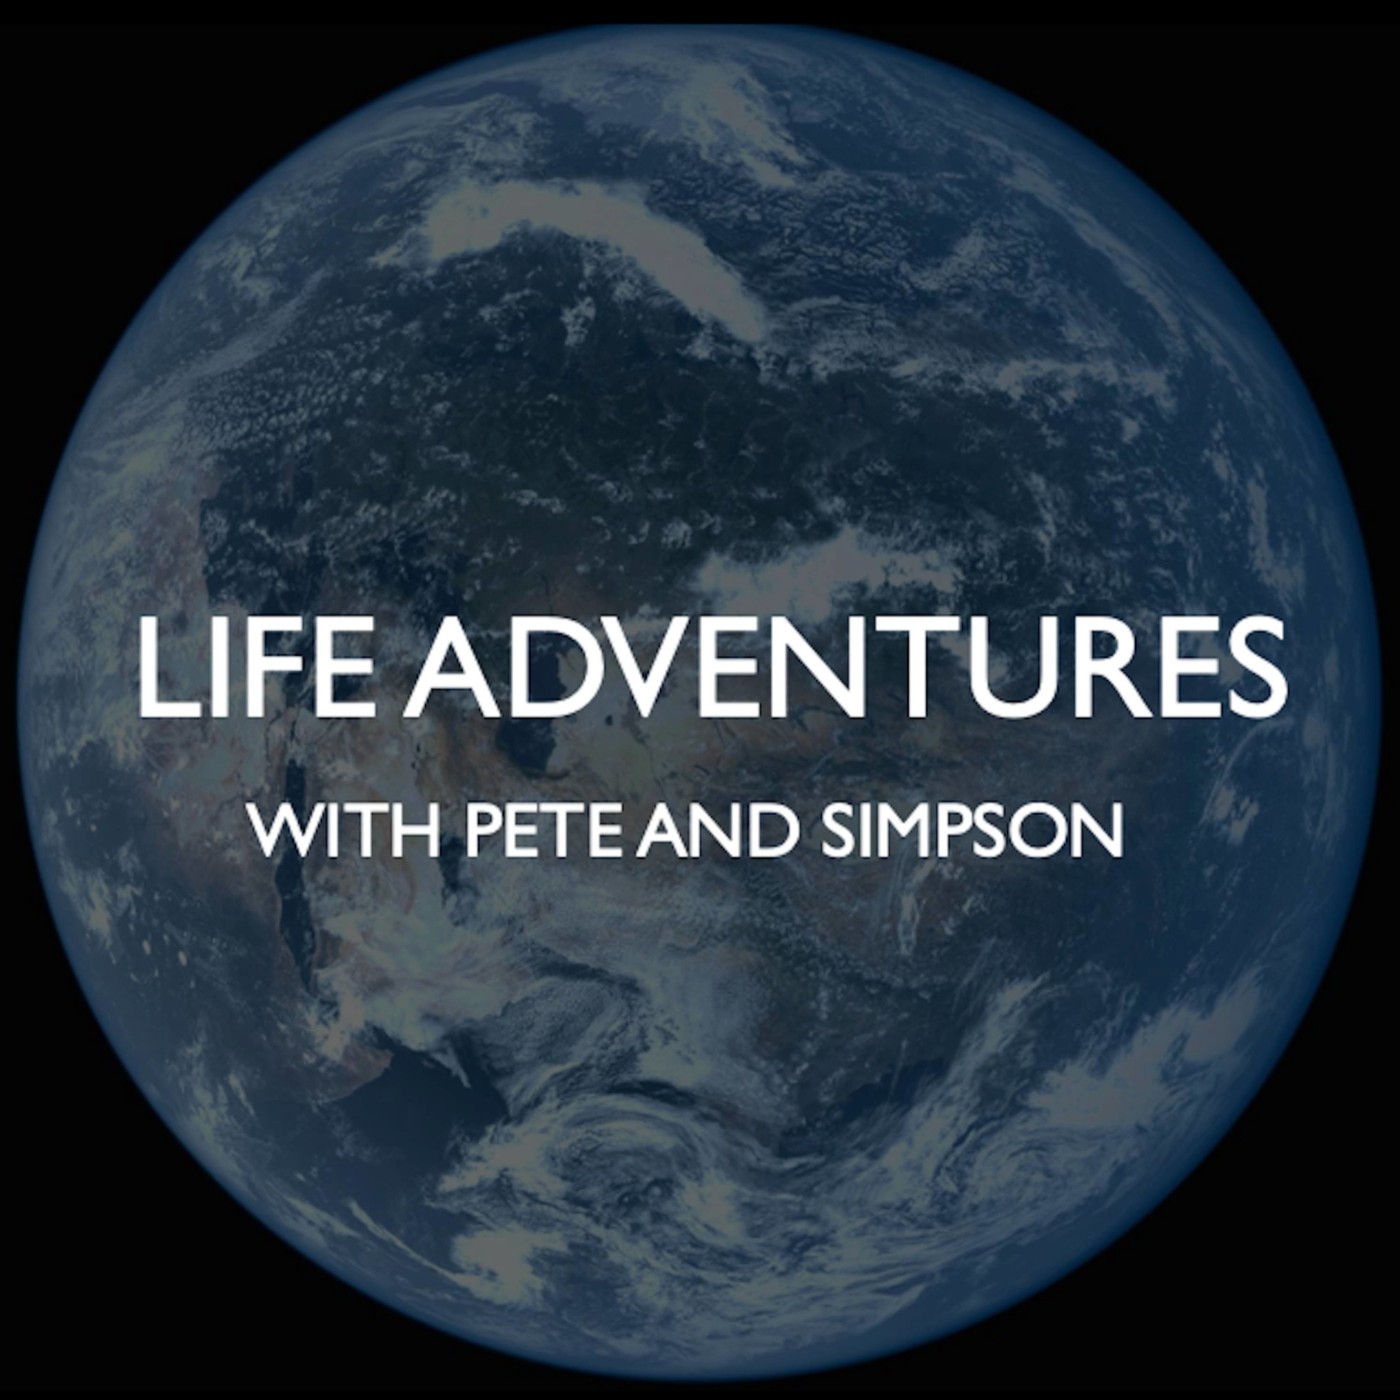 Life Adventures with Pete and Simpson